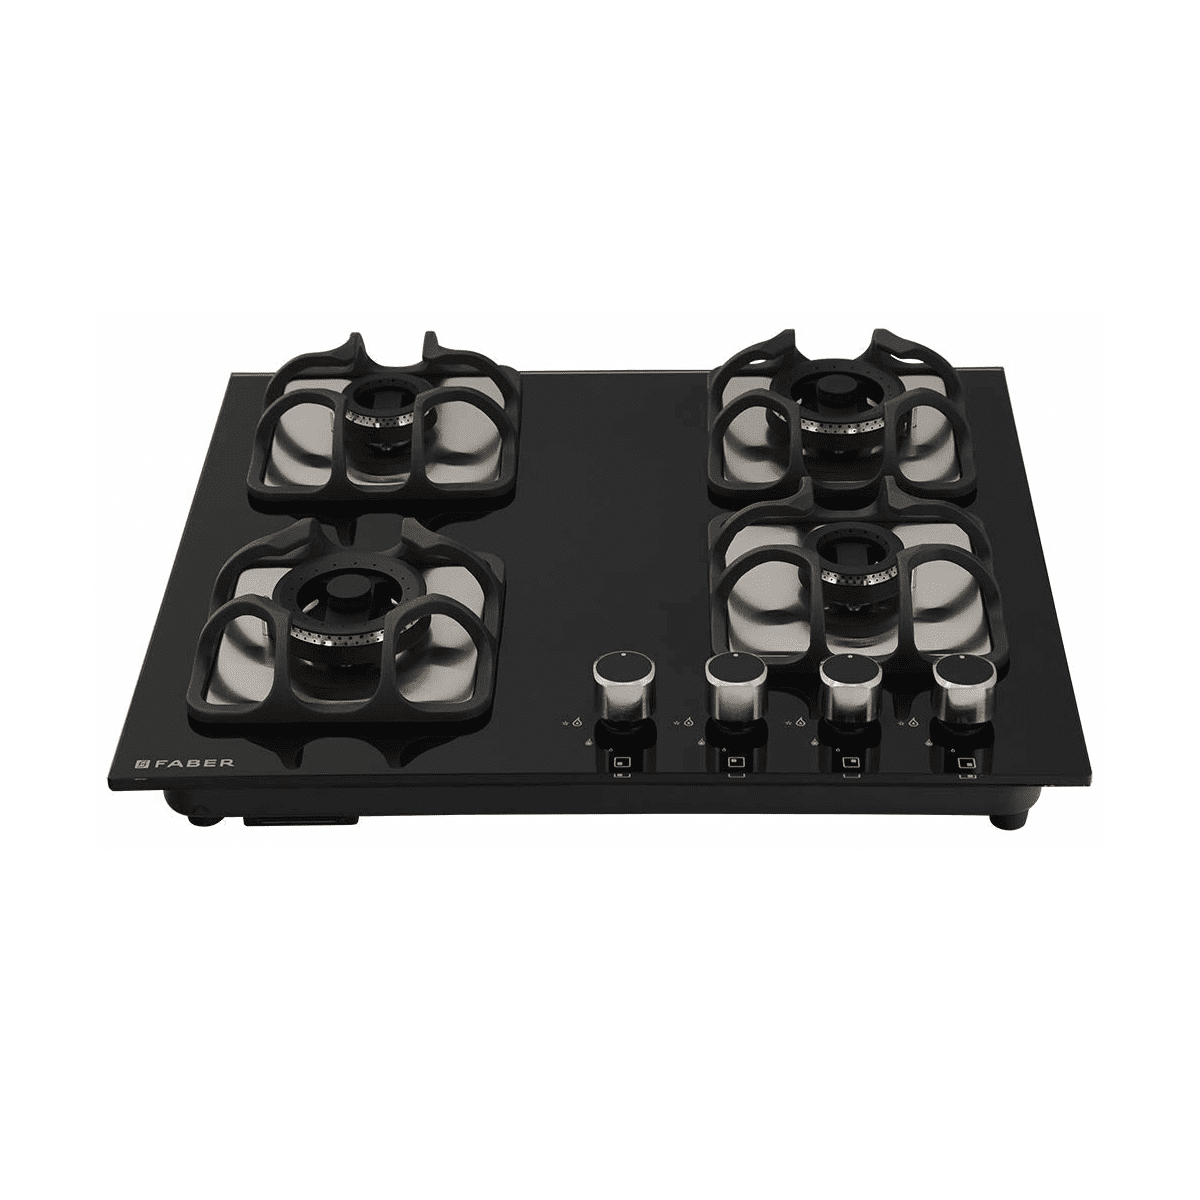 FABER BUILD IN HOBS 60 CMS, IMPERIA 604 BRB CI, BLACK